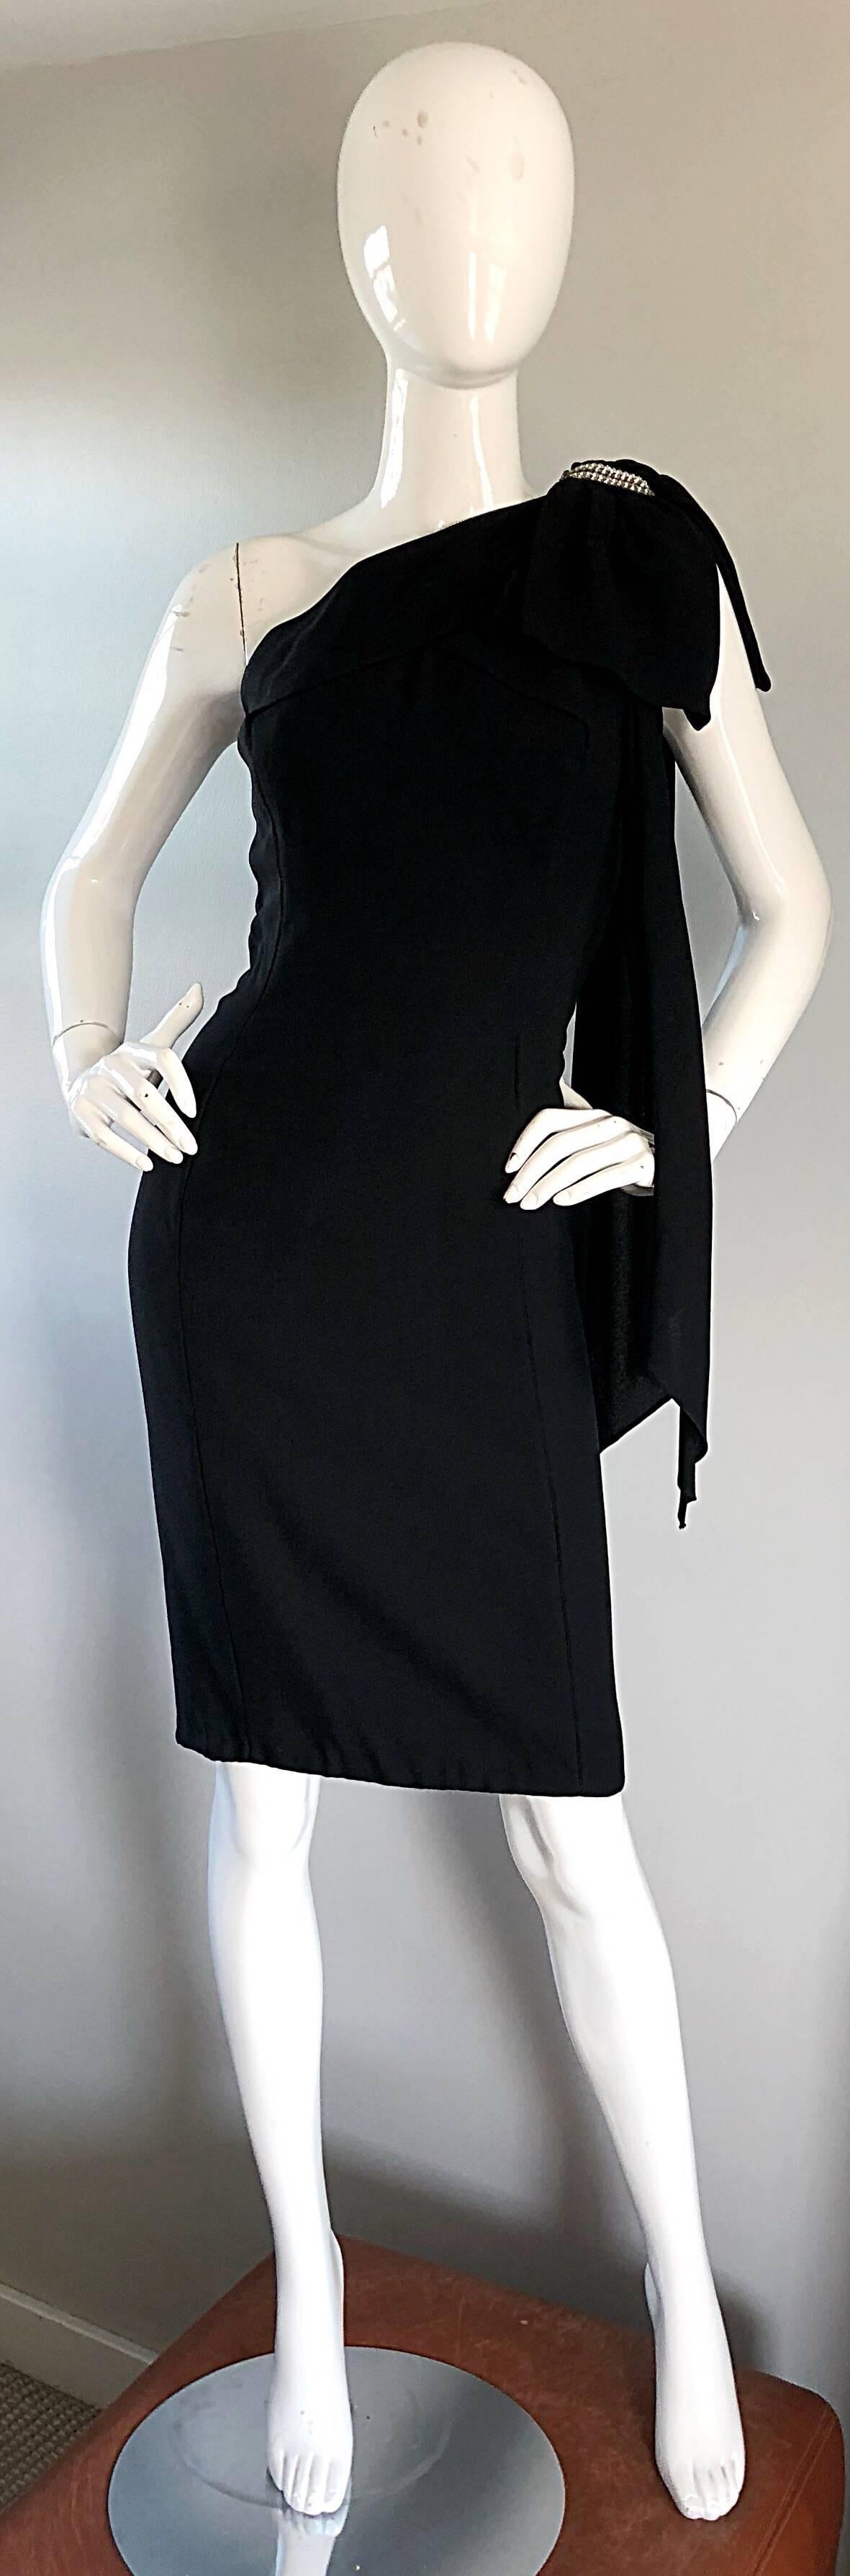 Exceptional vintage 1950s ANITA MODES black silk crepe one shoulder cocktail wiggle dress! Form fitting silhouette hugs the body in all the right places. So Marilyn Monroe, Audrey Hepburn, Grace Kelly, Jayne Mansfield, etc..Definitely a 50s starlet